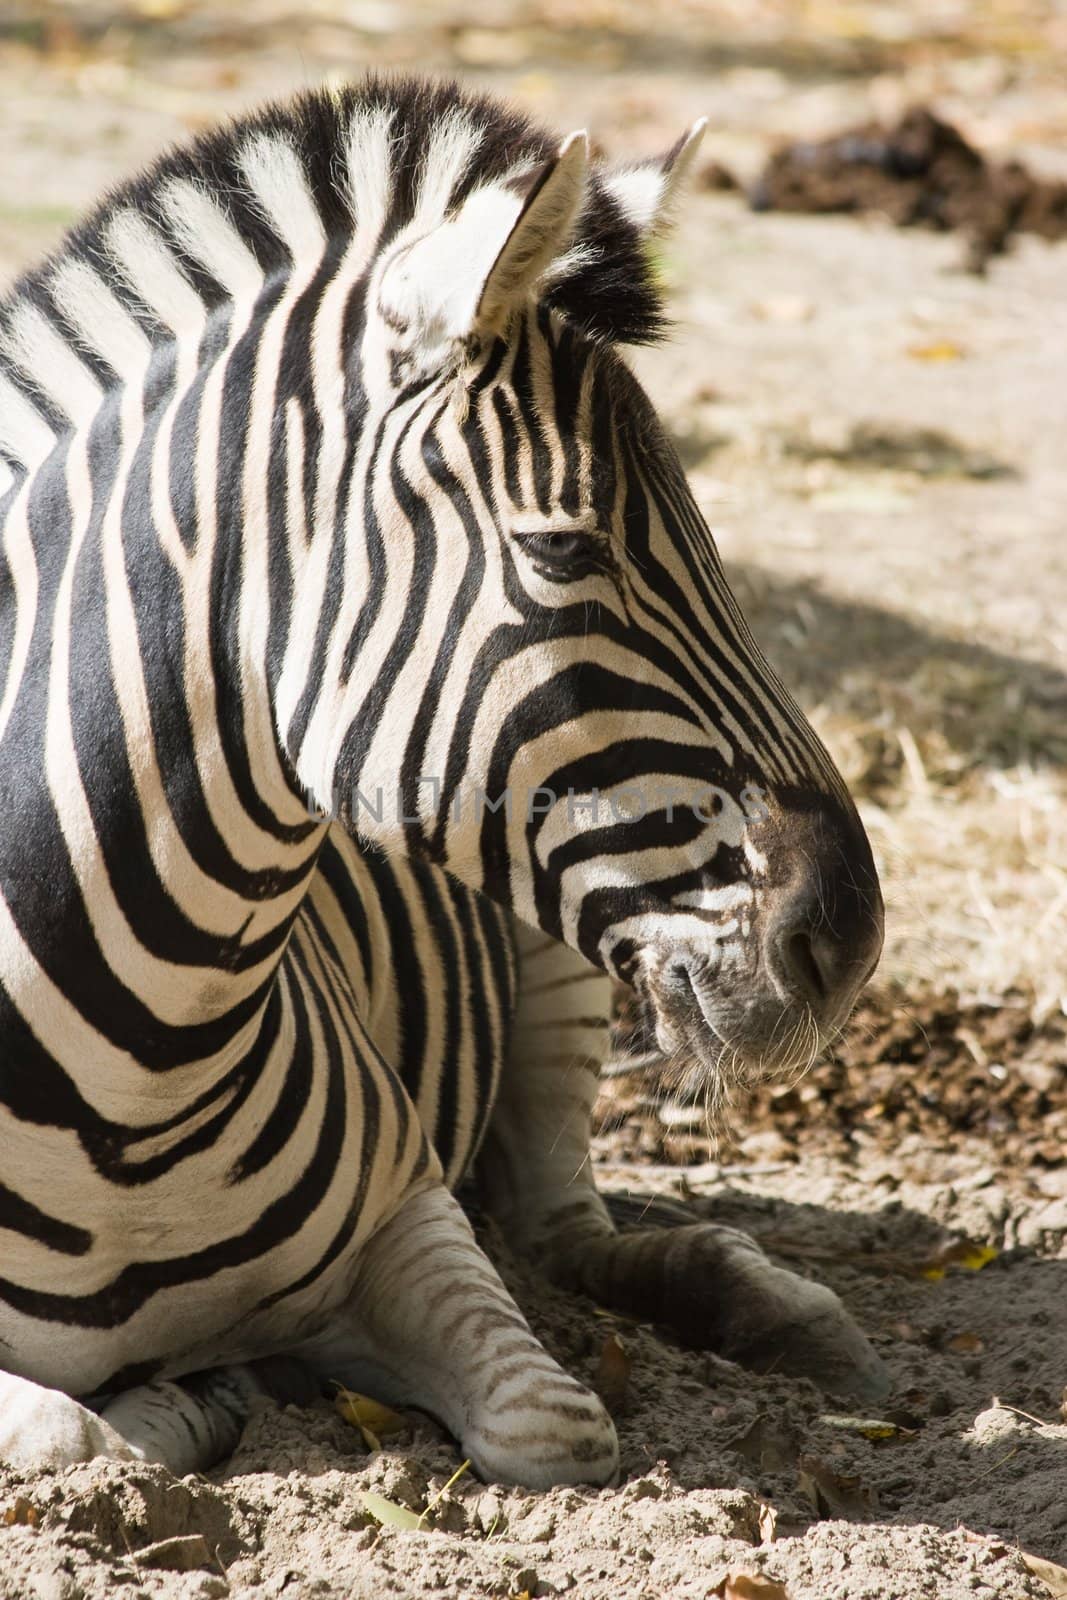 Zebra resting by Colette